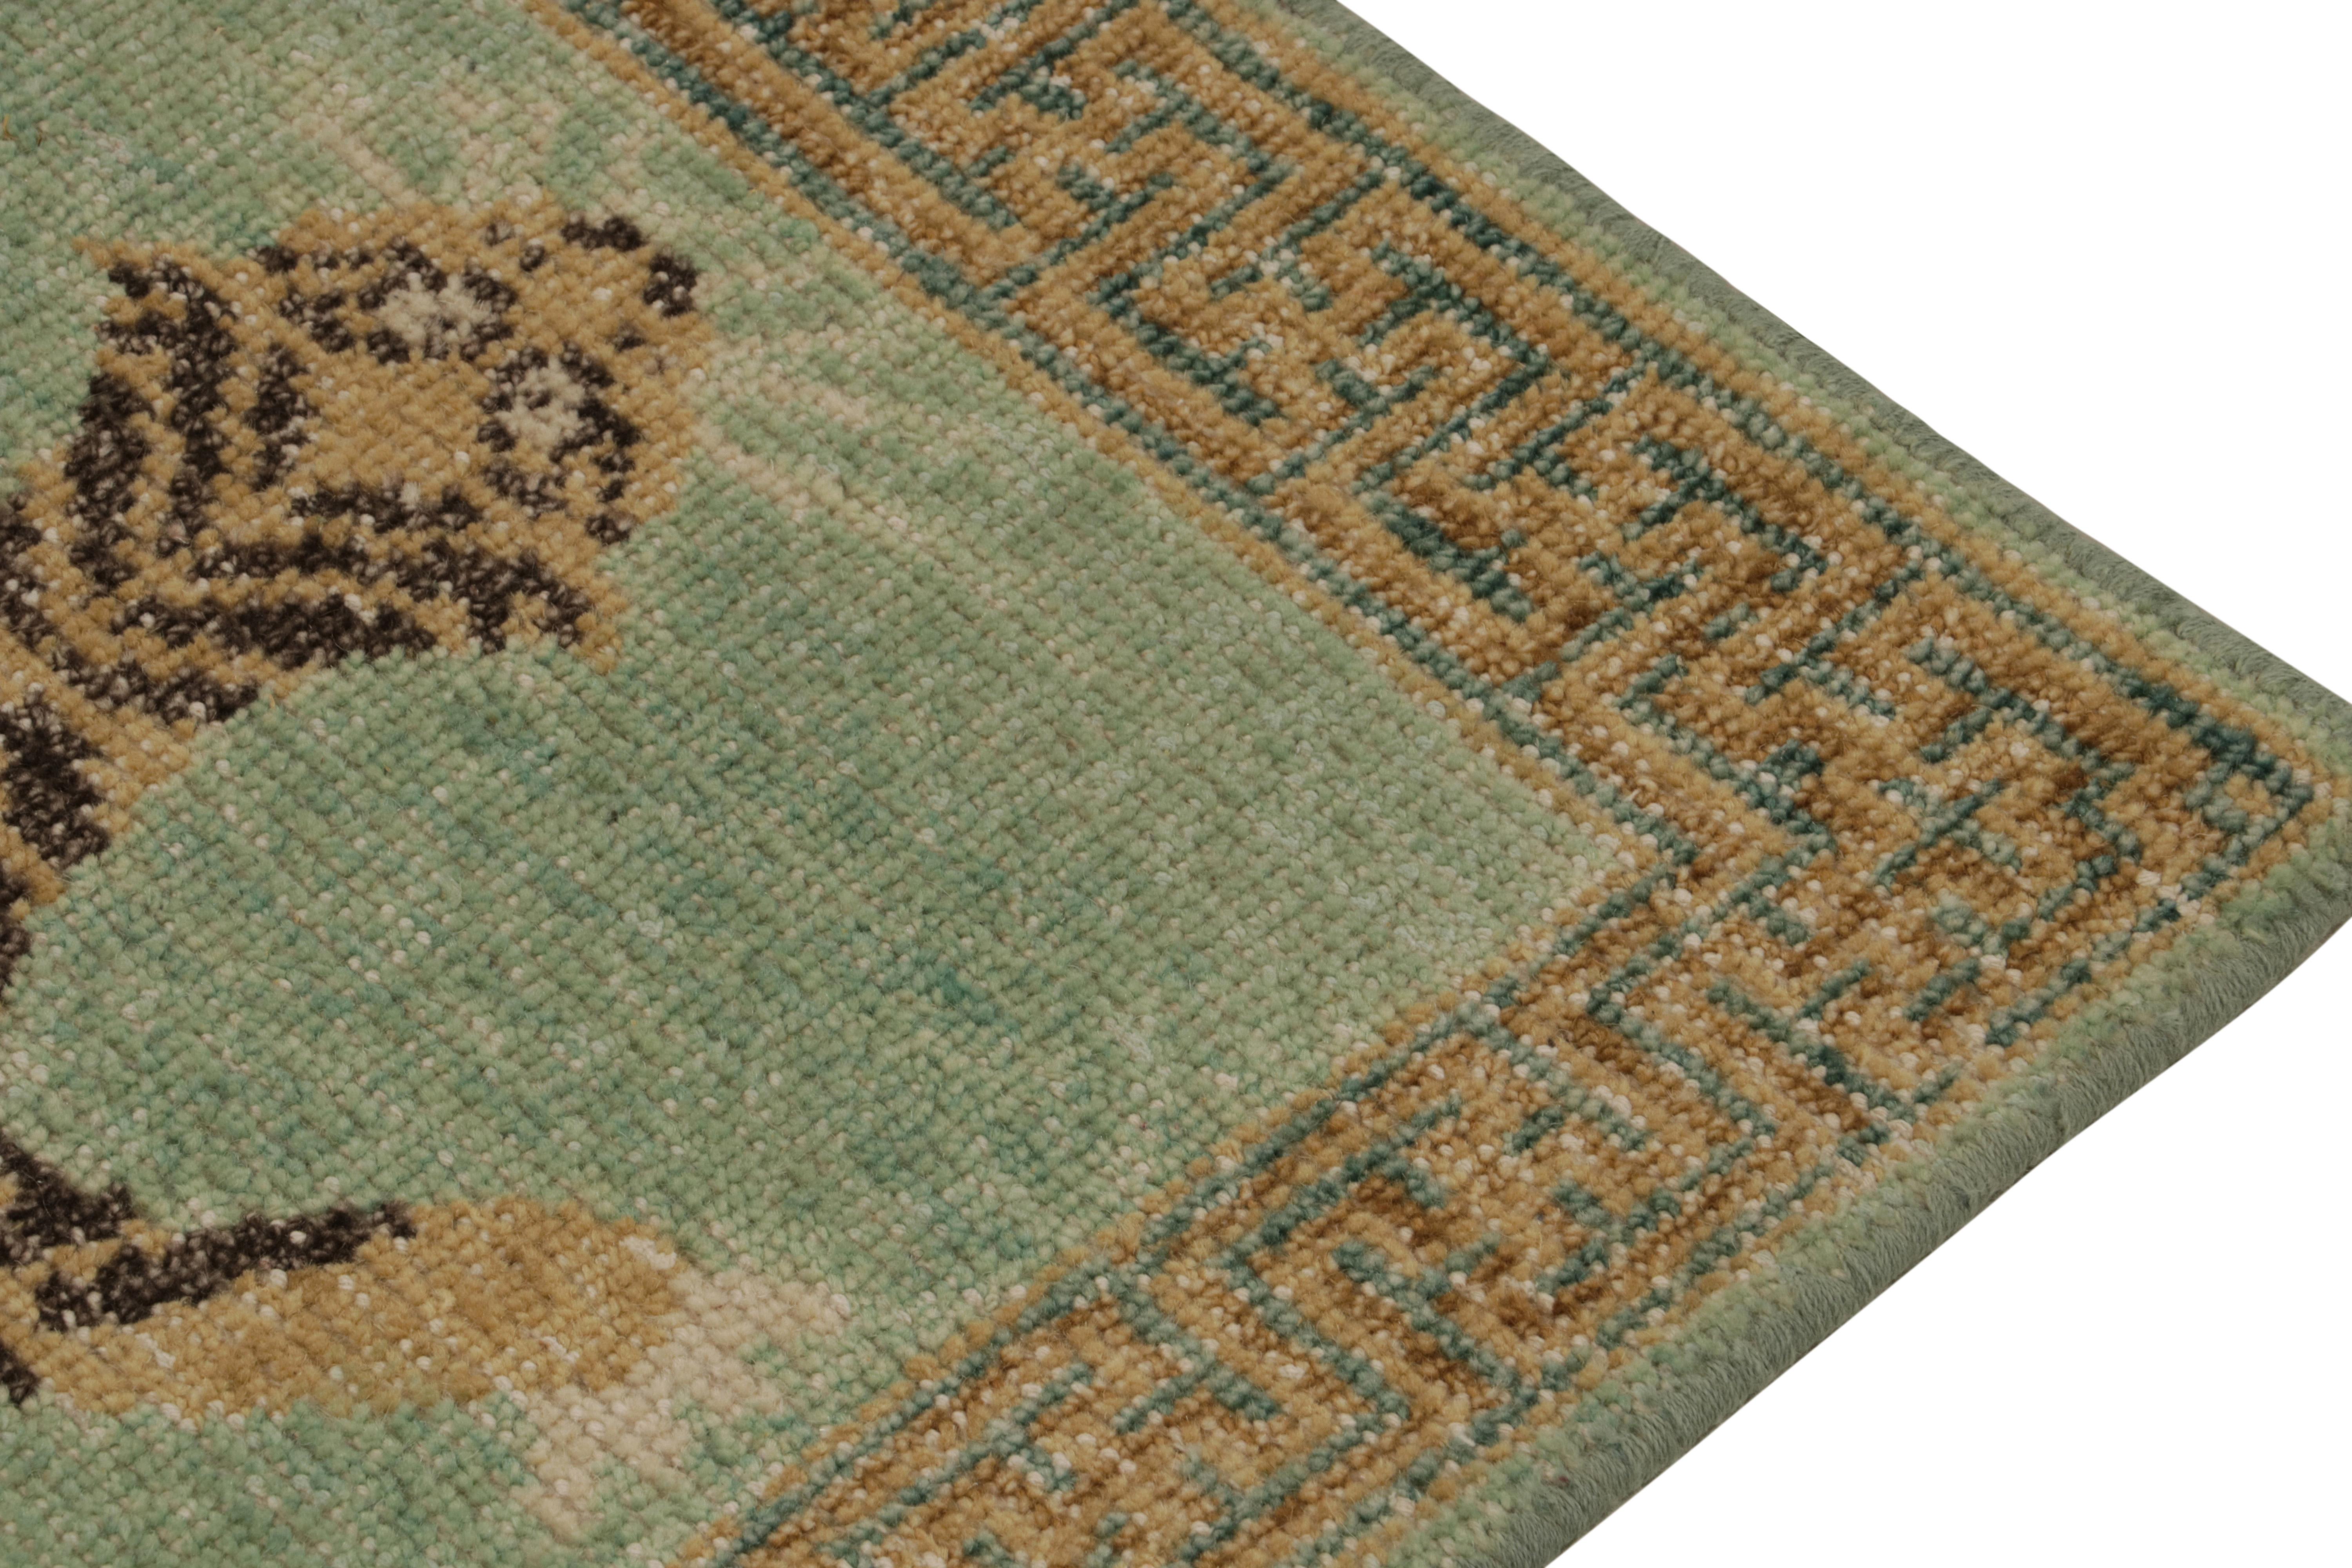 Hand-Knotted Rug & Kilim’s Distressed Tiger Skin Style Rug in Green, Beige & Black Pictorial For Sale